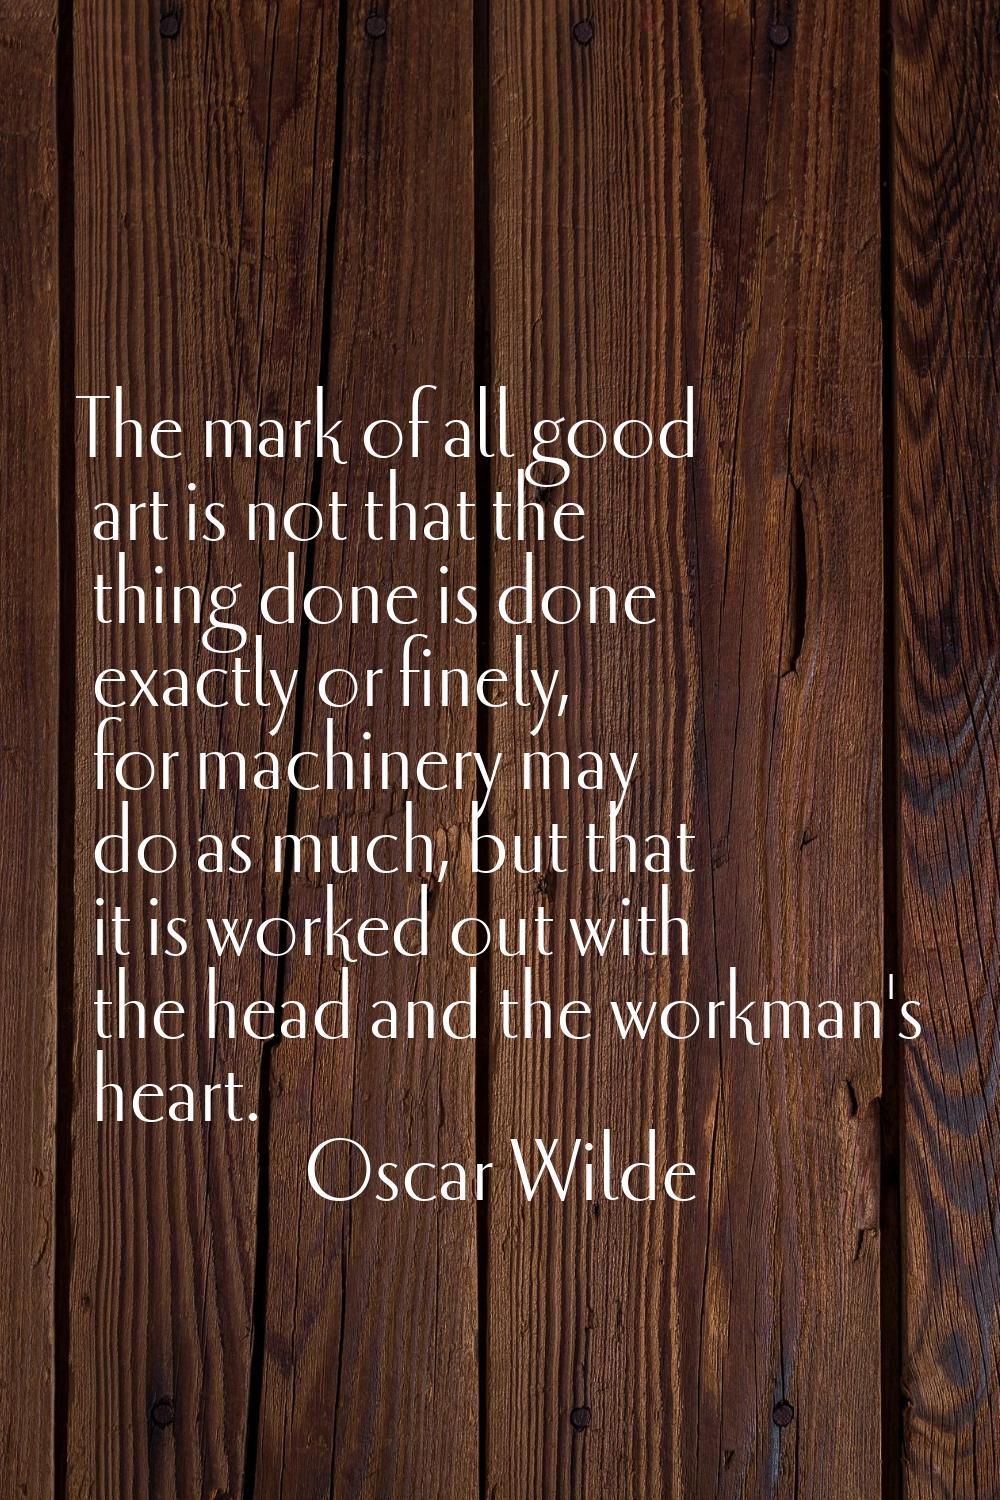 The mark of all good art is not that the thing done is done exactly or finely, for machinery may do